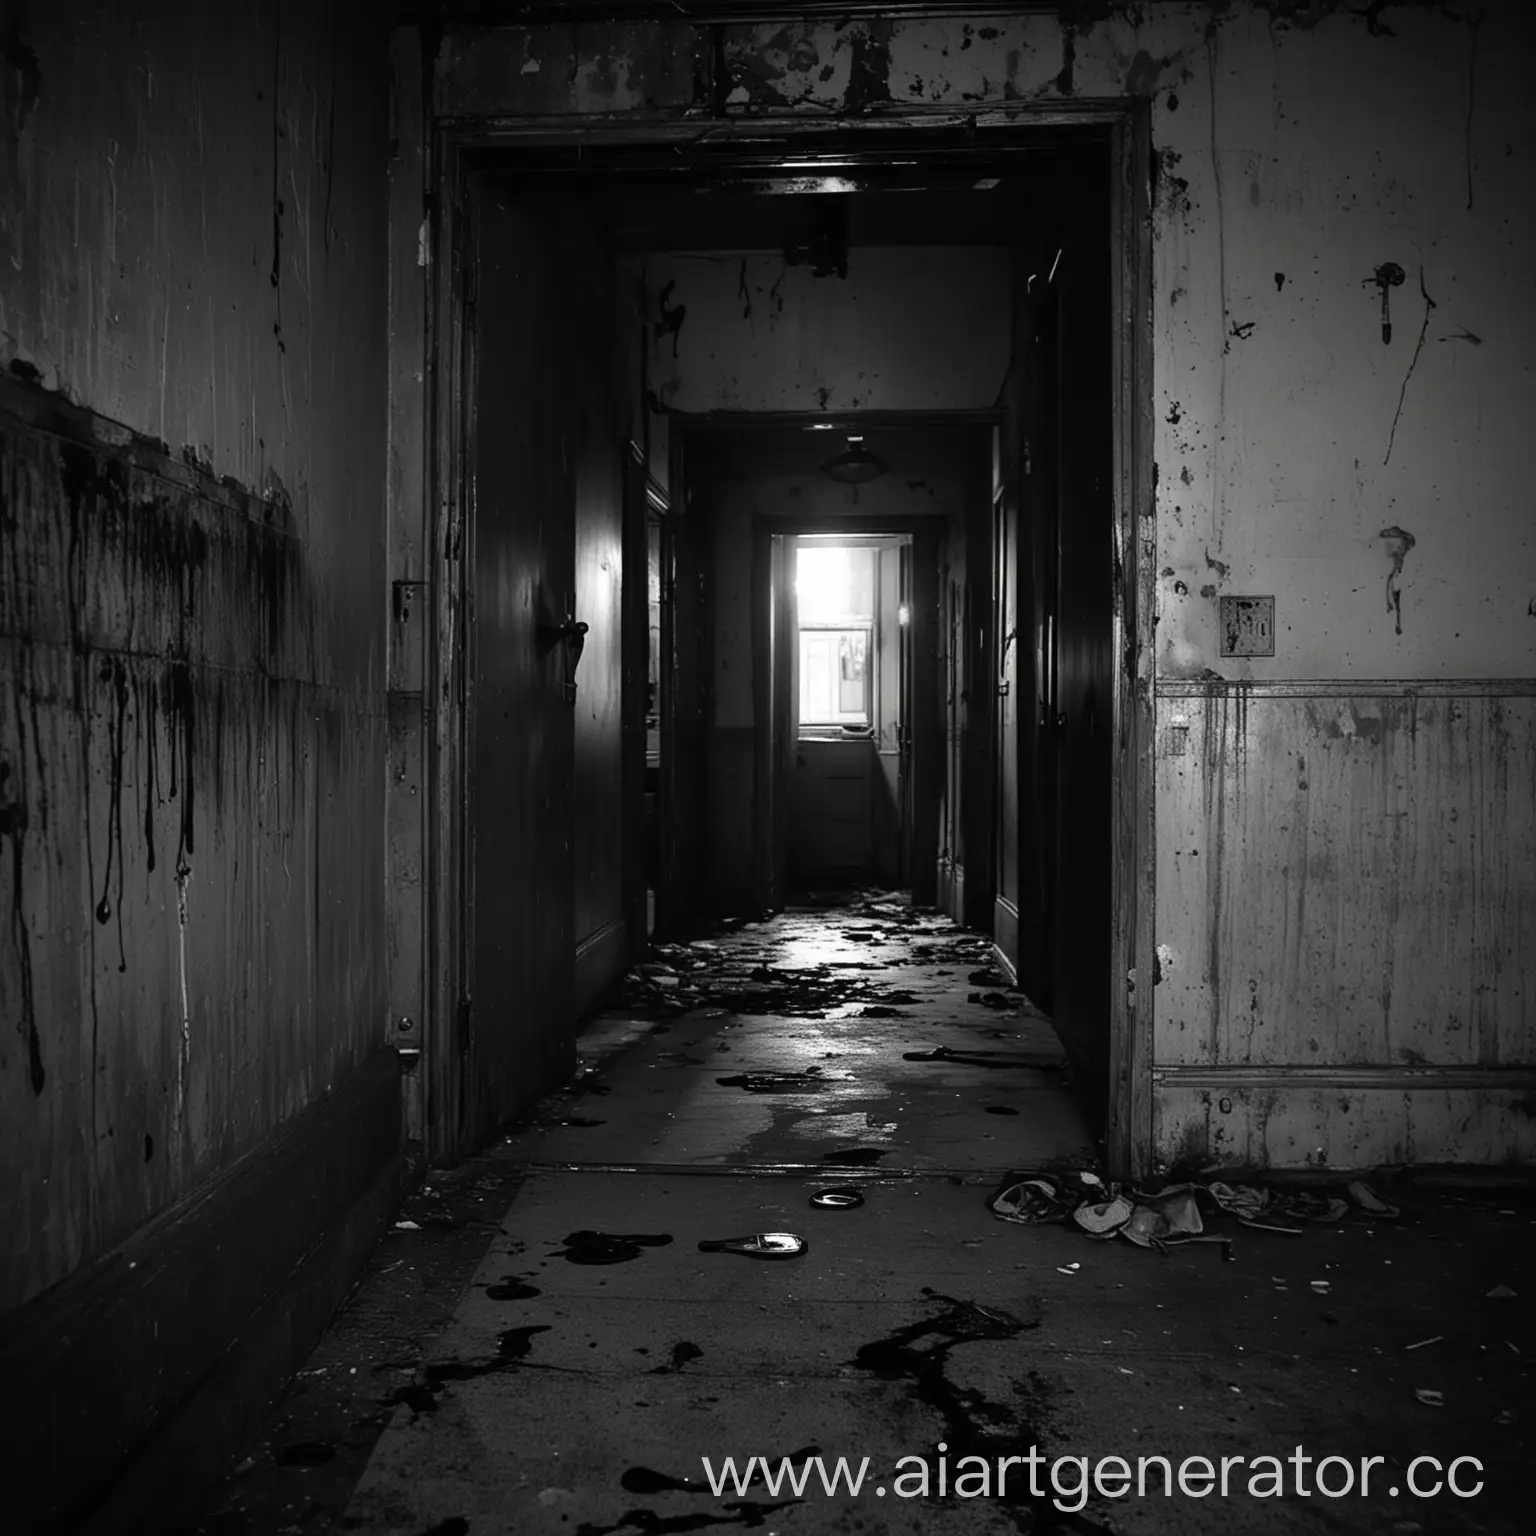 Desolate-Abandoned-Hospital-Corridors-with-Eerie-Atmosphere-and-Haunting-Shadows